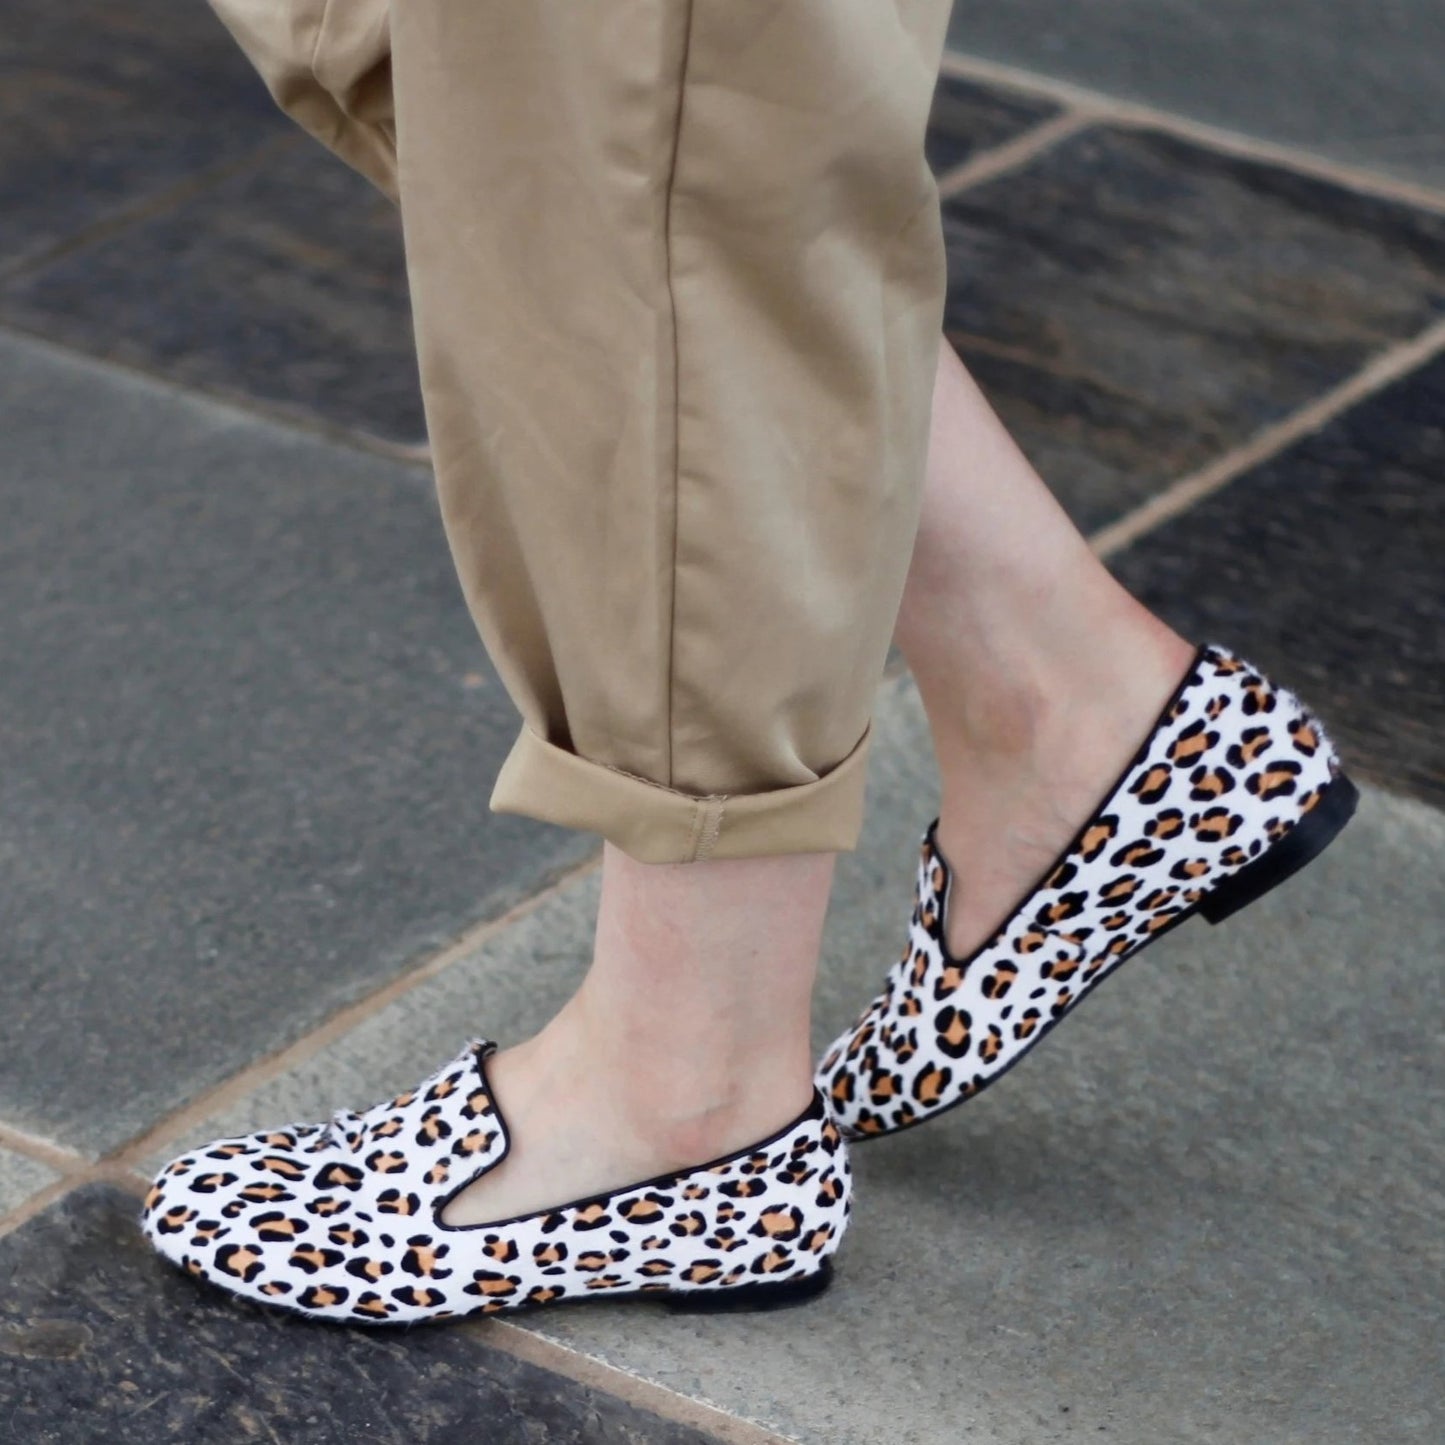 Comfortable Leopard Print Loafer with Arch Support and Orthotic Friendly, Suitable for Wide feet and Plantar Fasciitis